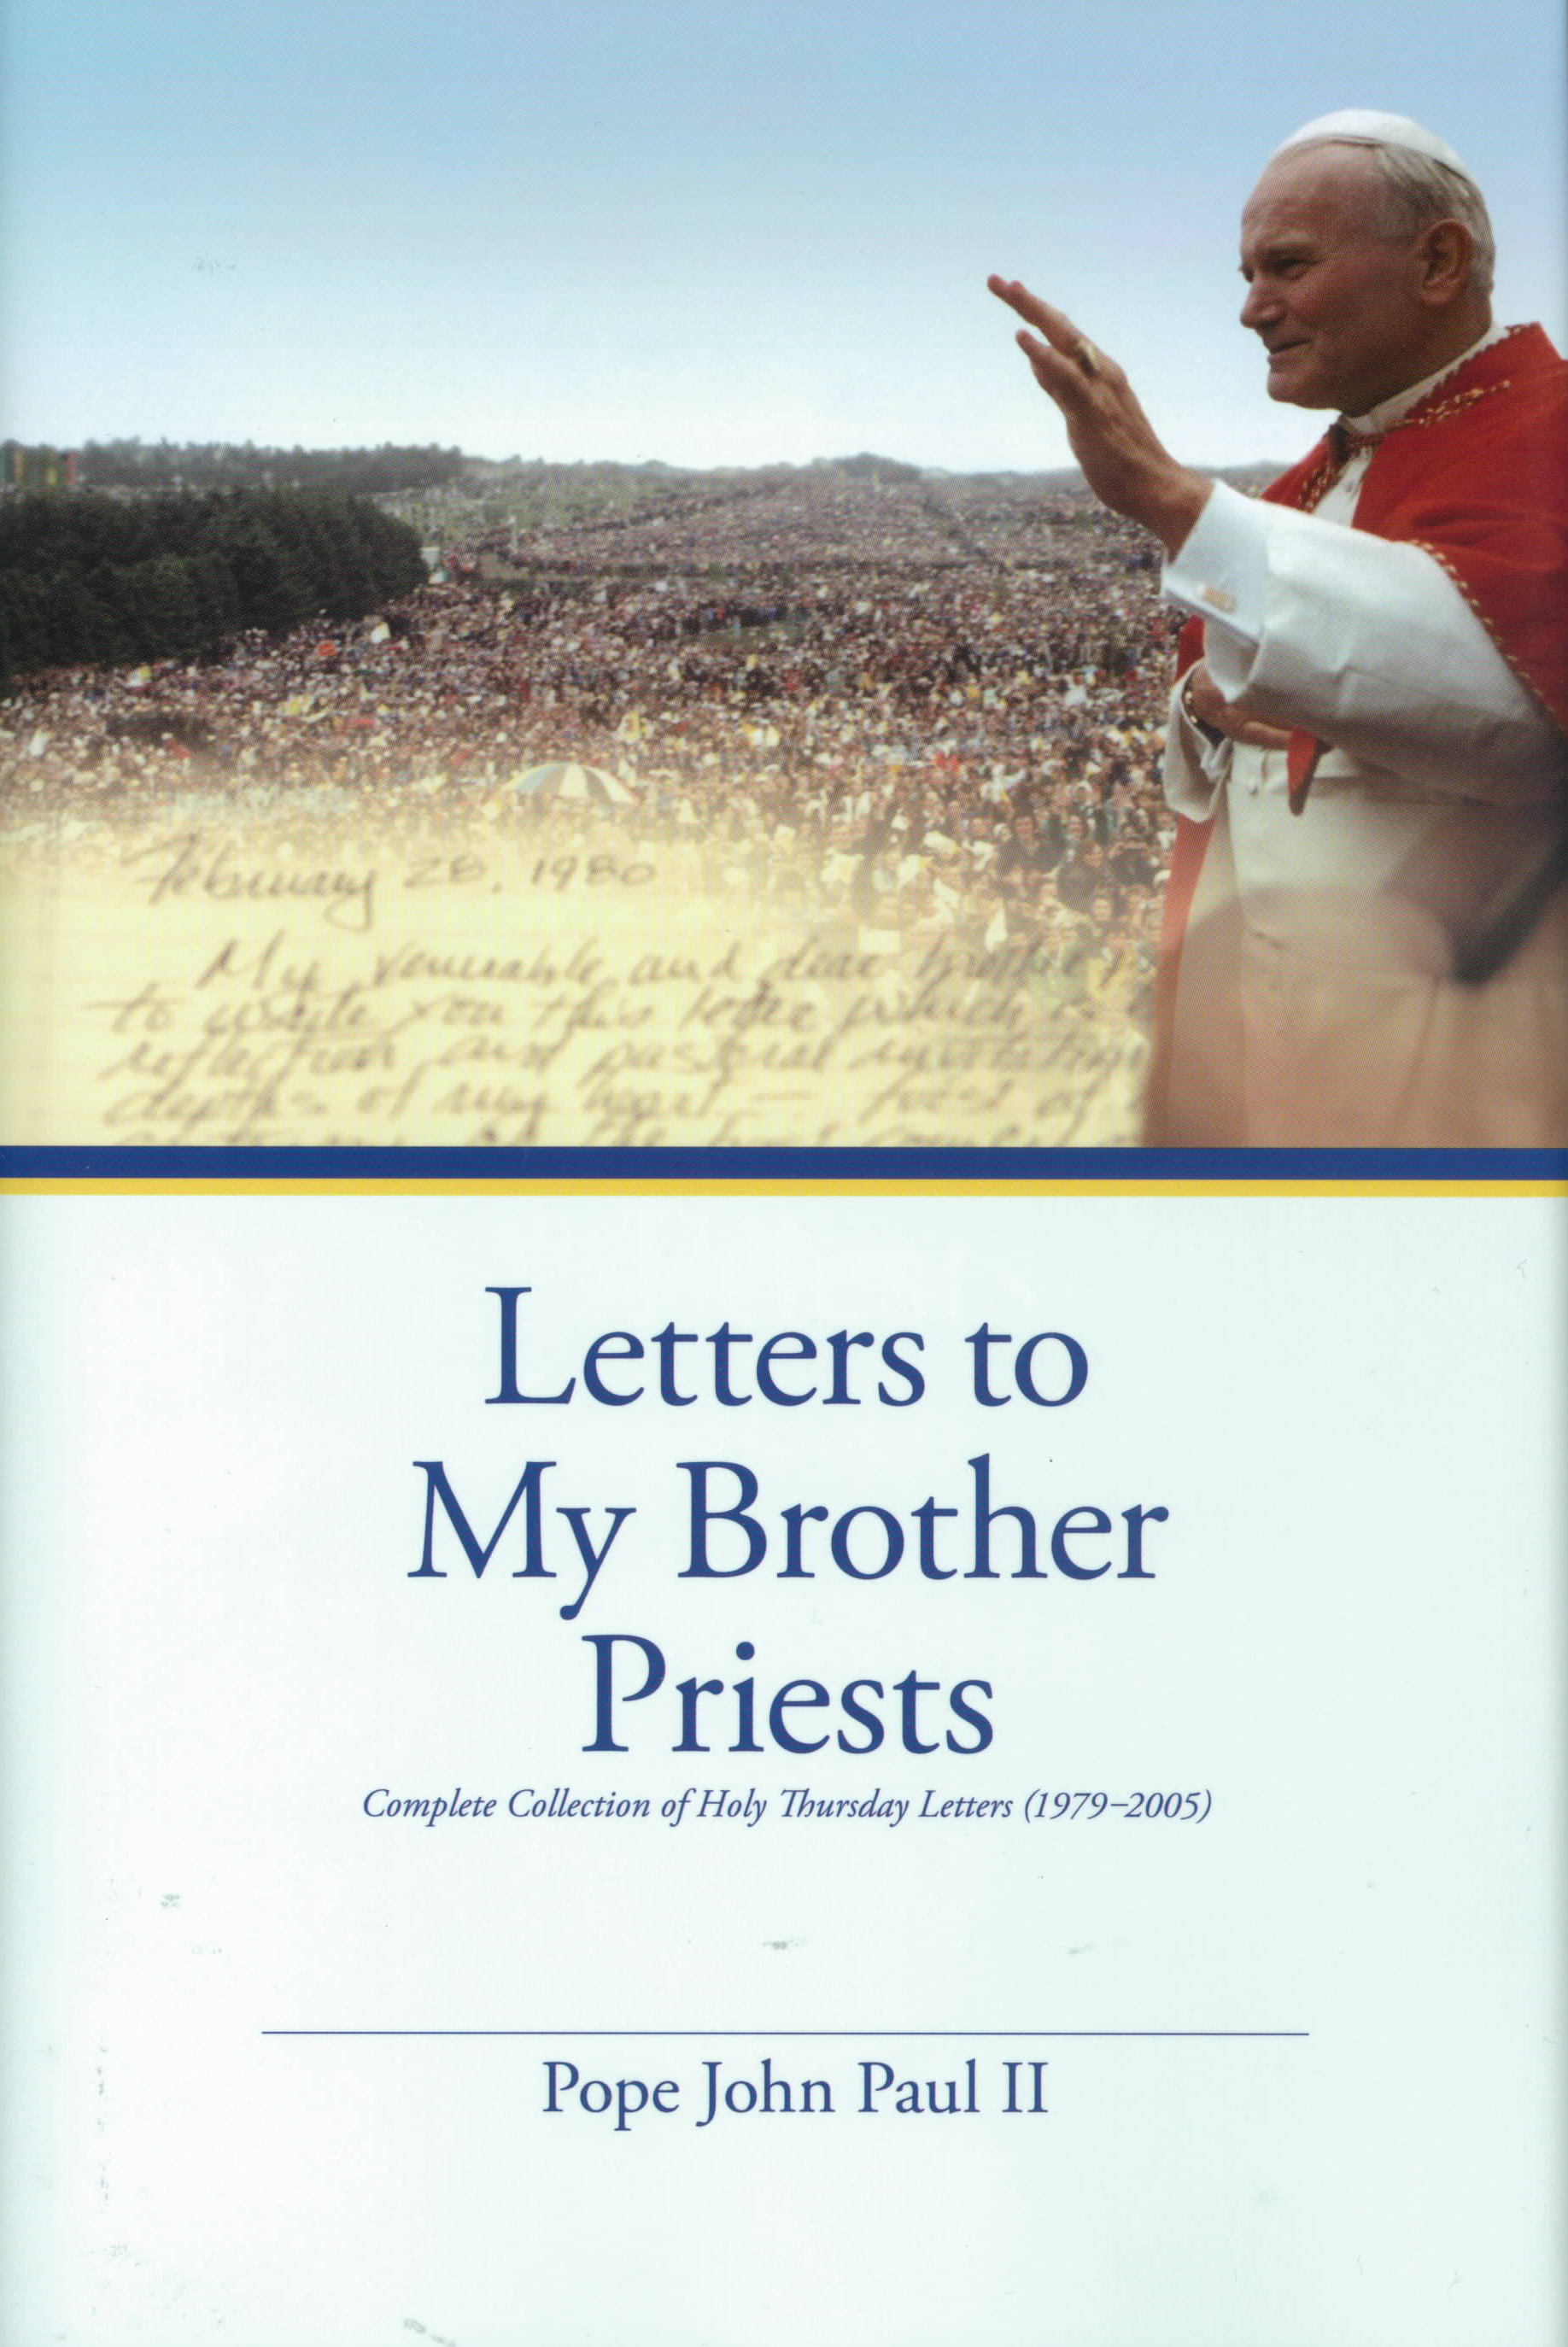 Letters to My Brother Priests by Pope John Paul II 445-7758X